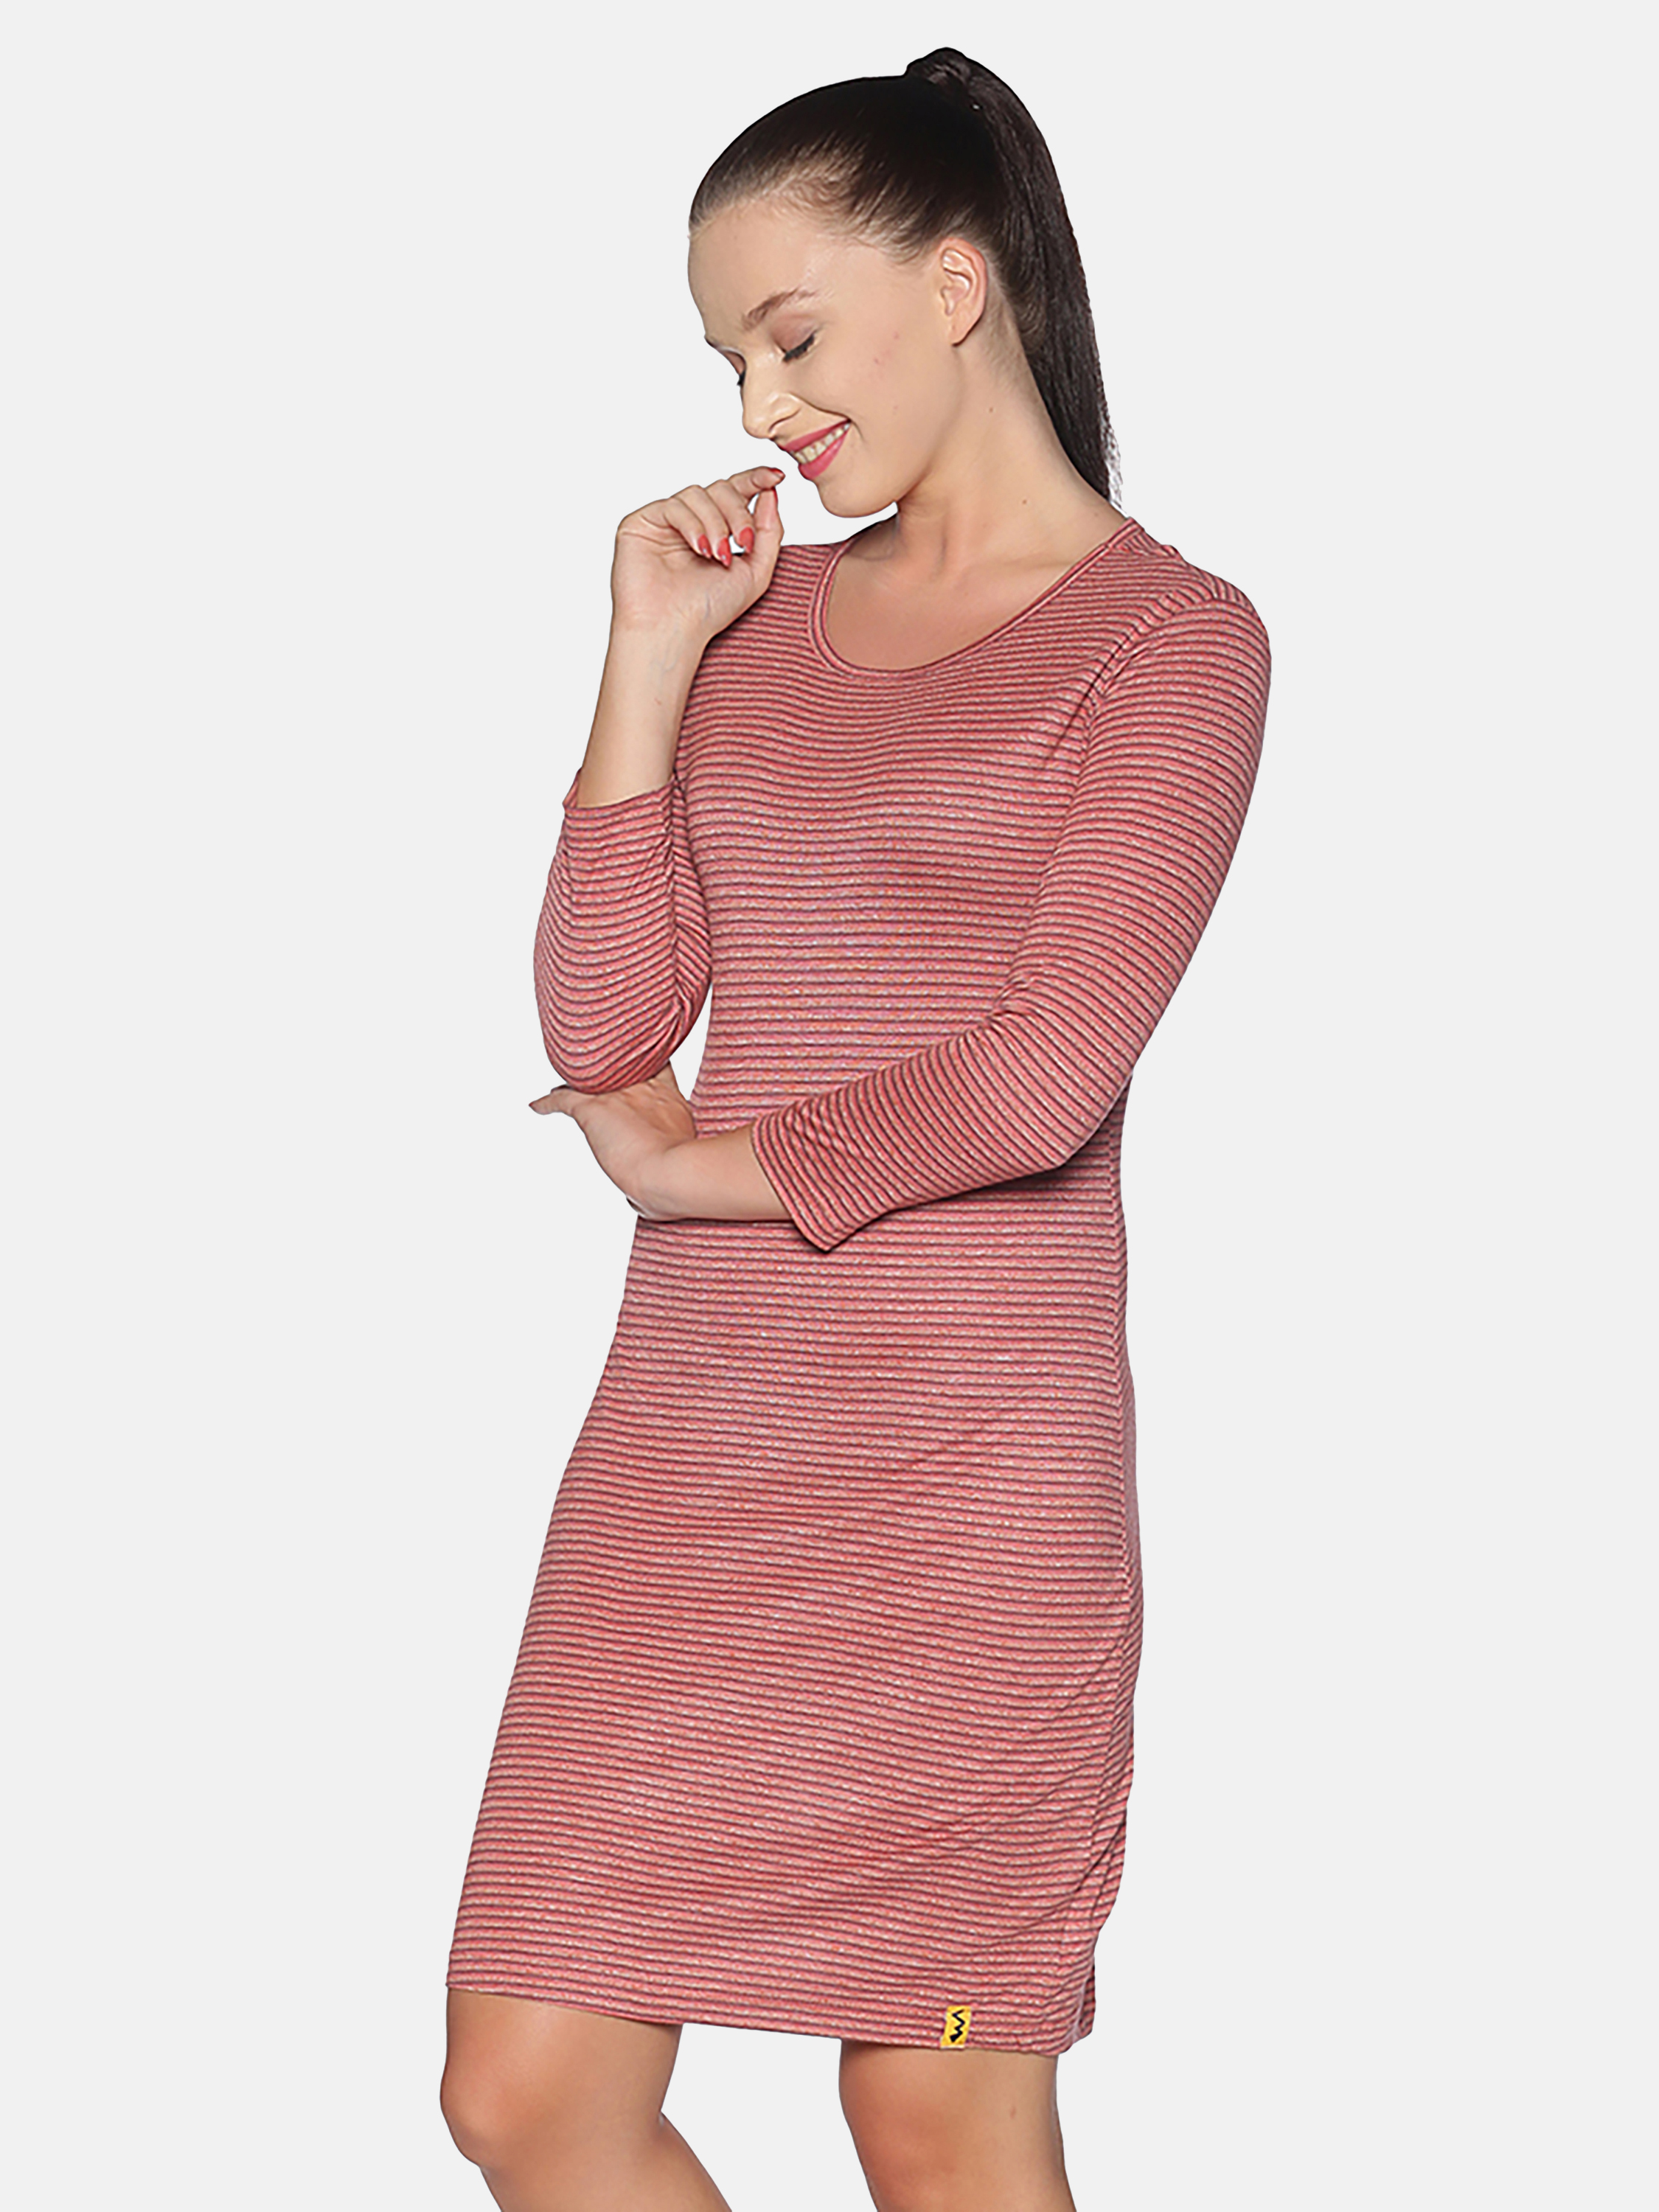 Campus Sutra Women Striped Casual Party Dresses